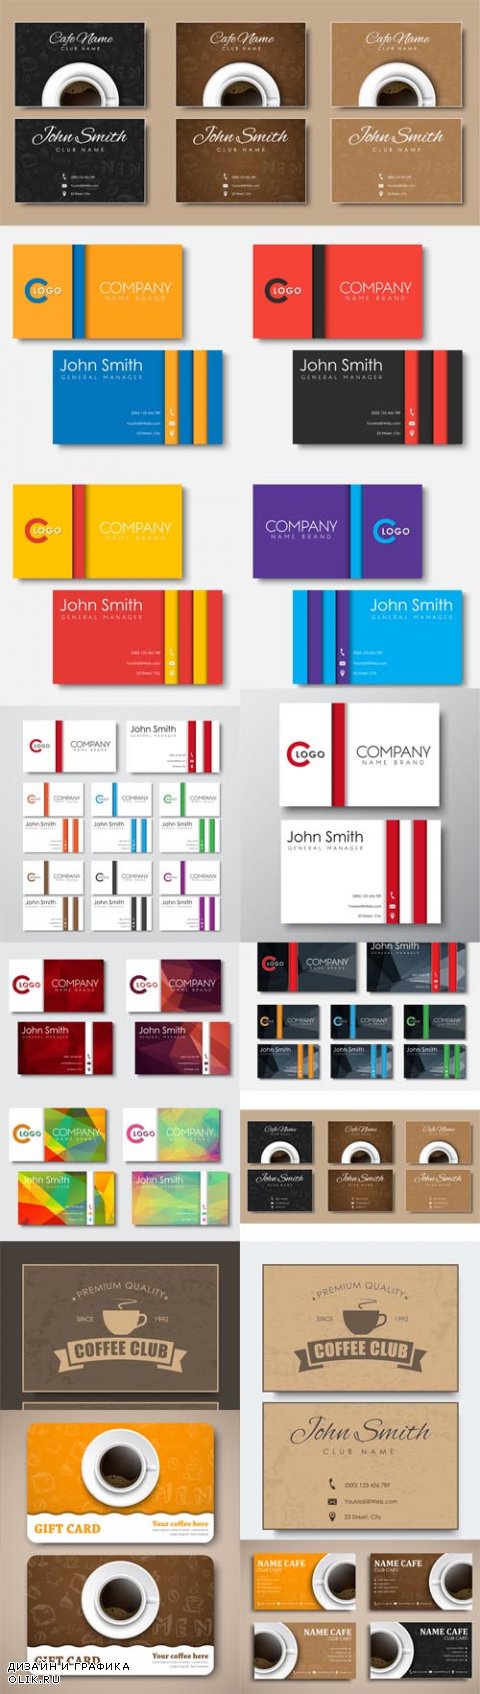 Vector Business Cards Templates in the Style of the Material Design